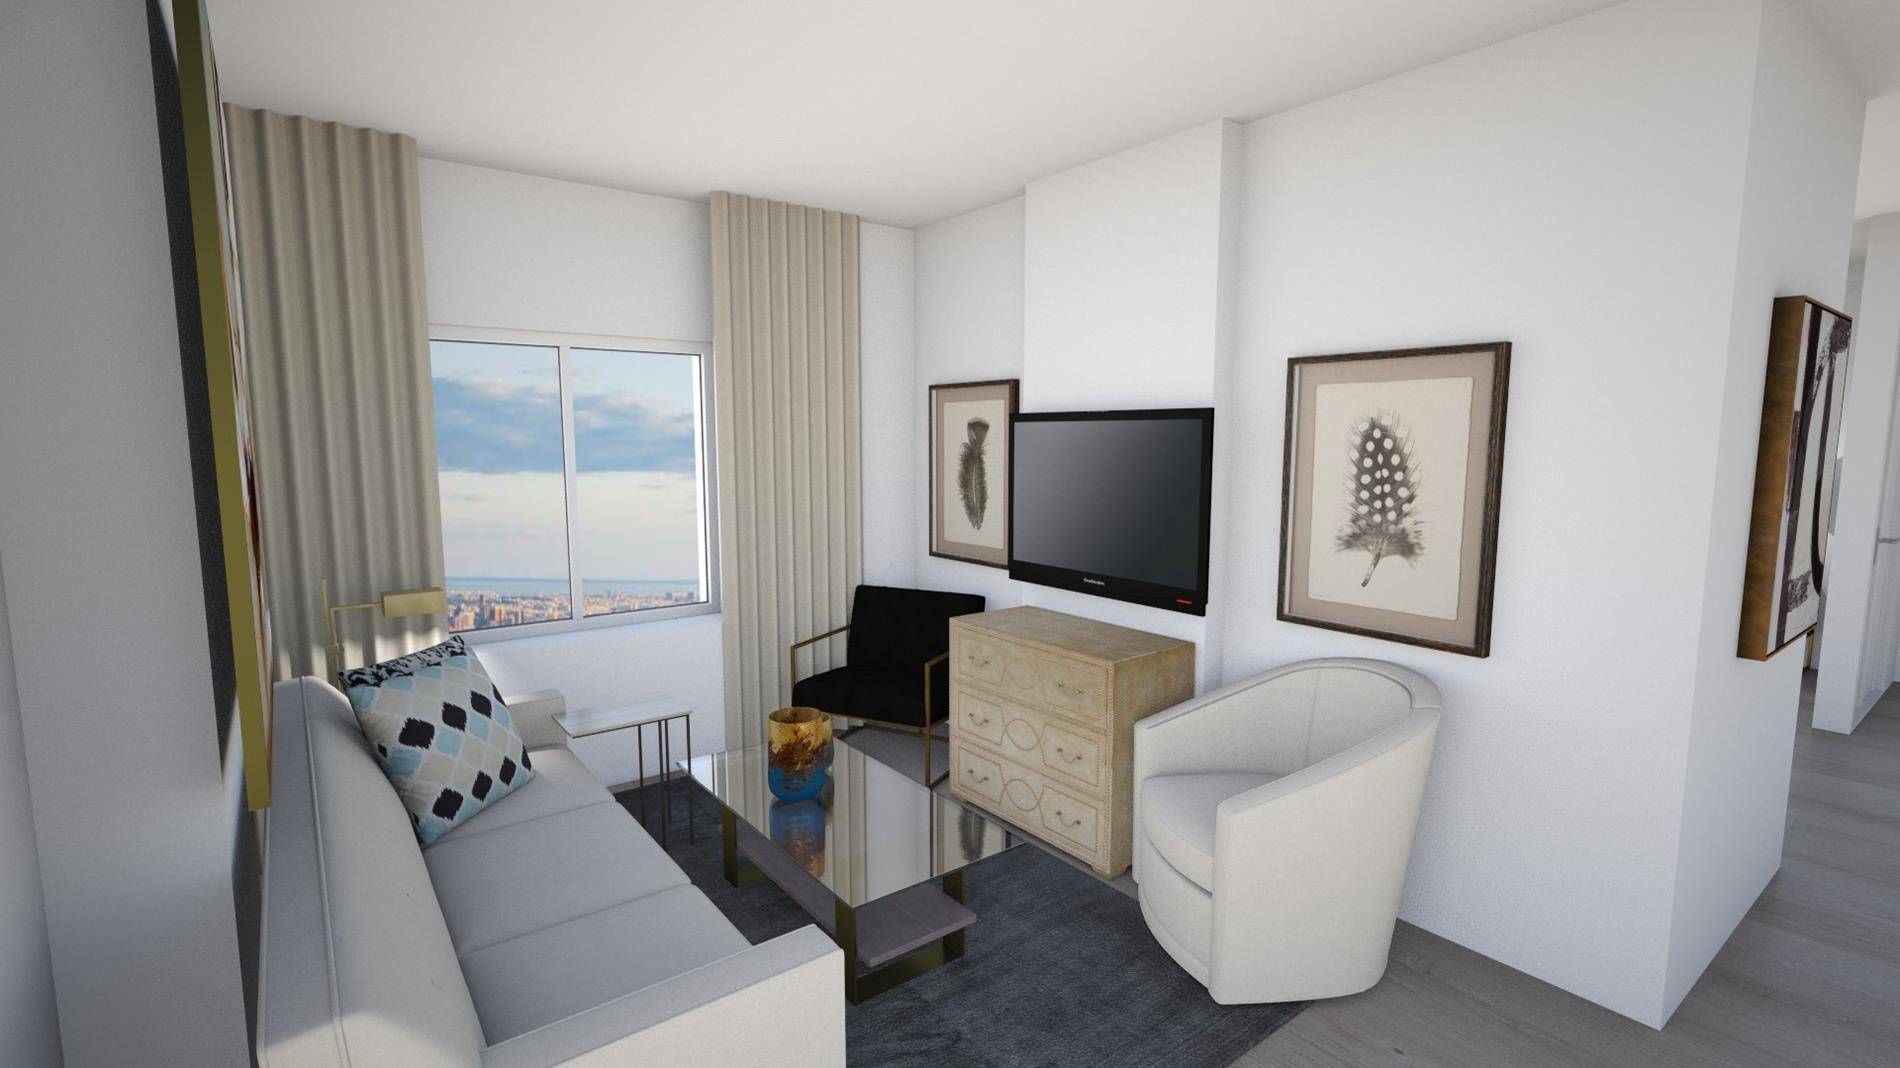 NOW LEASING WELCOME TO THE VICTORIA TOWER RESIDENCES !